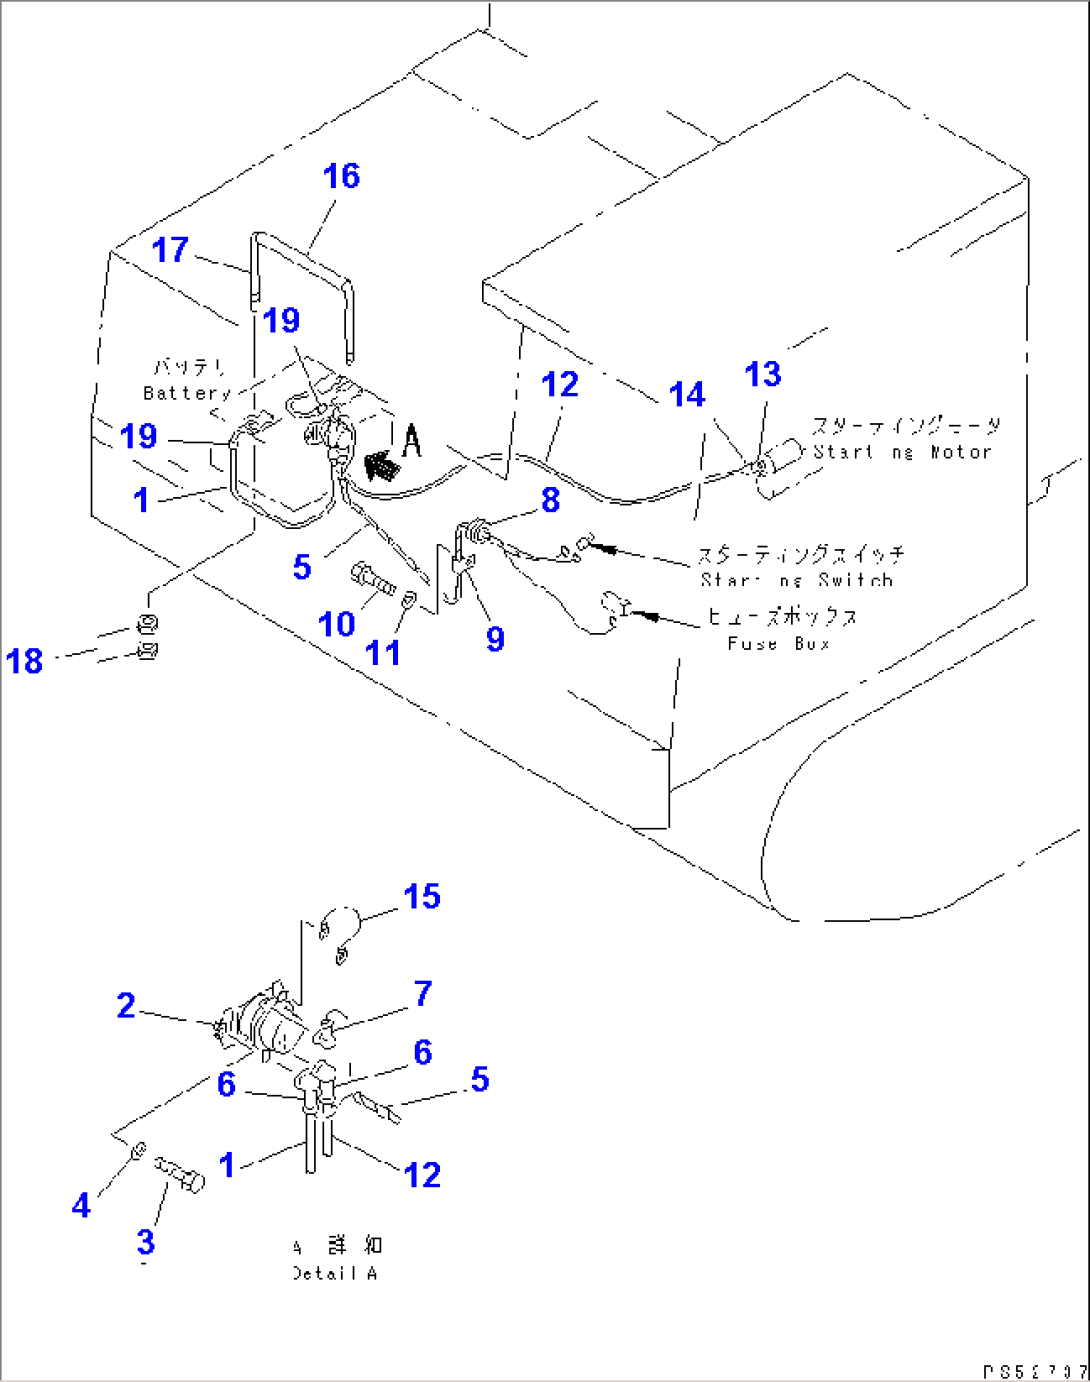 ELECTRICAL SYSTEM (BATTERY AND RELAY) (WITH AUTOMATIC SPLINKLING SYSTEM)(#1011-1015)